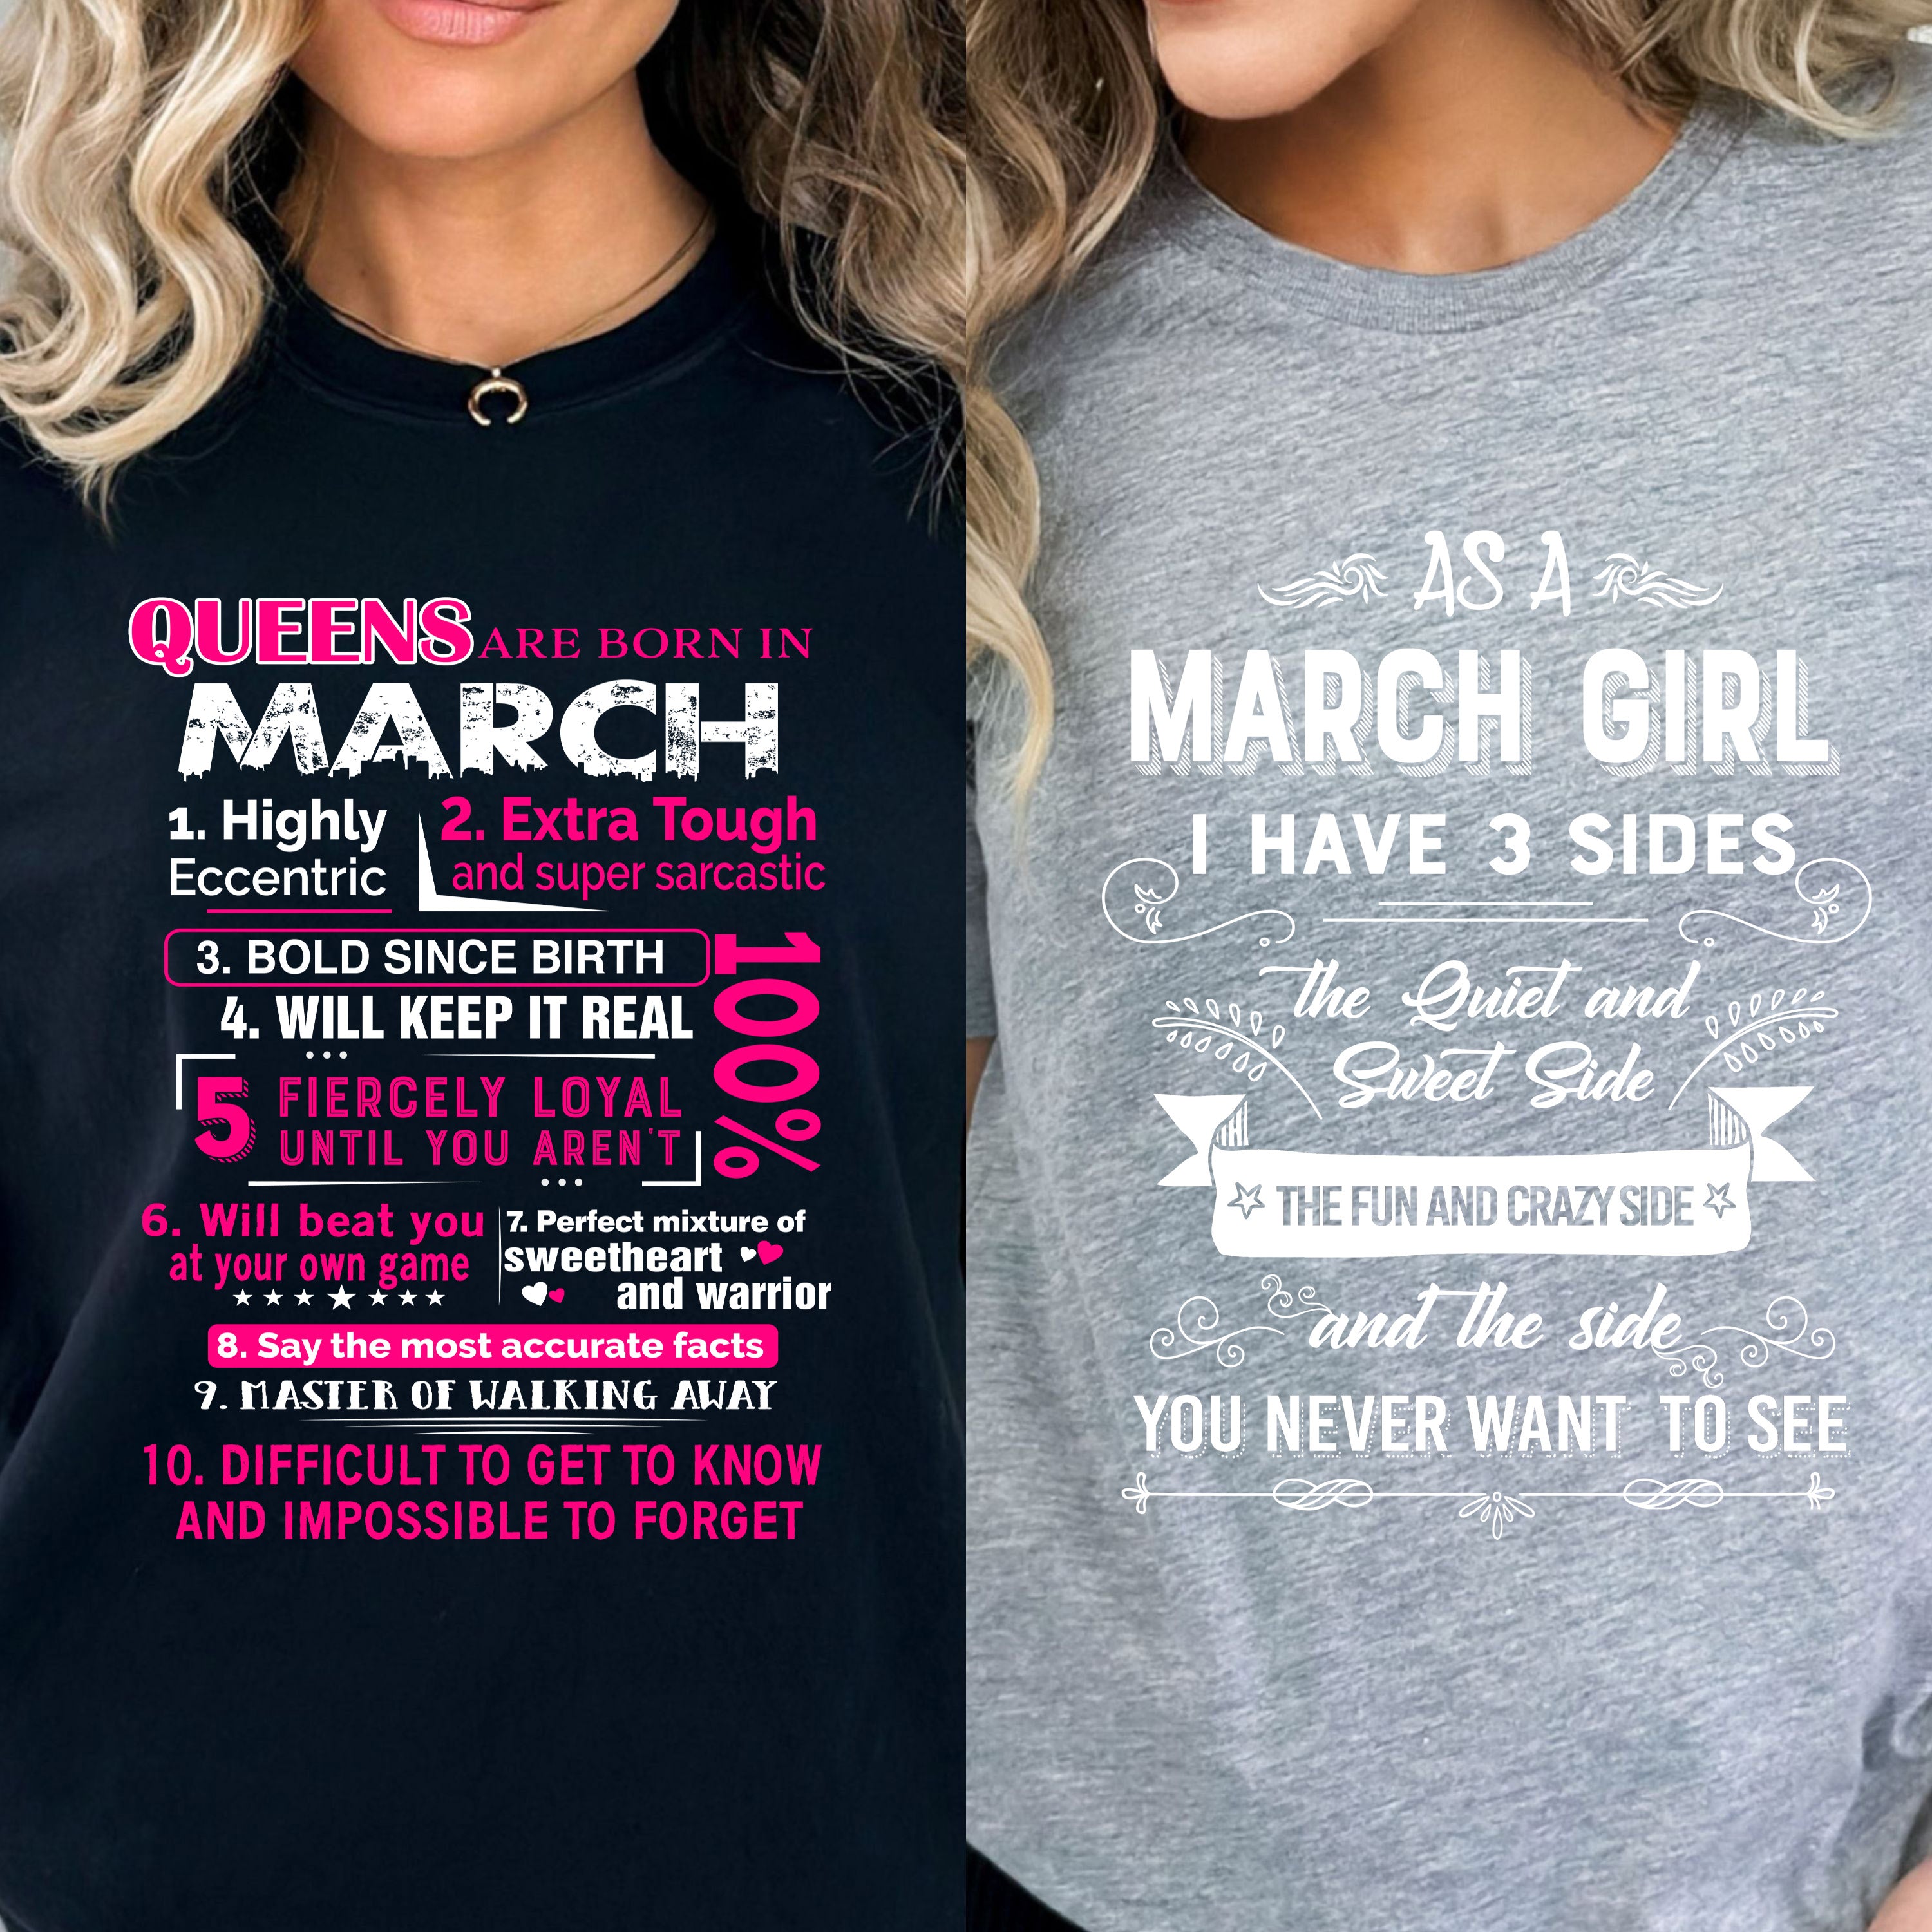 "March Queens + 3 Sides-Pack of 2",T-Shirt.